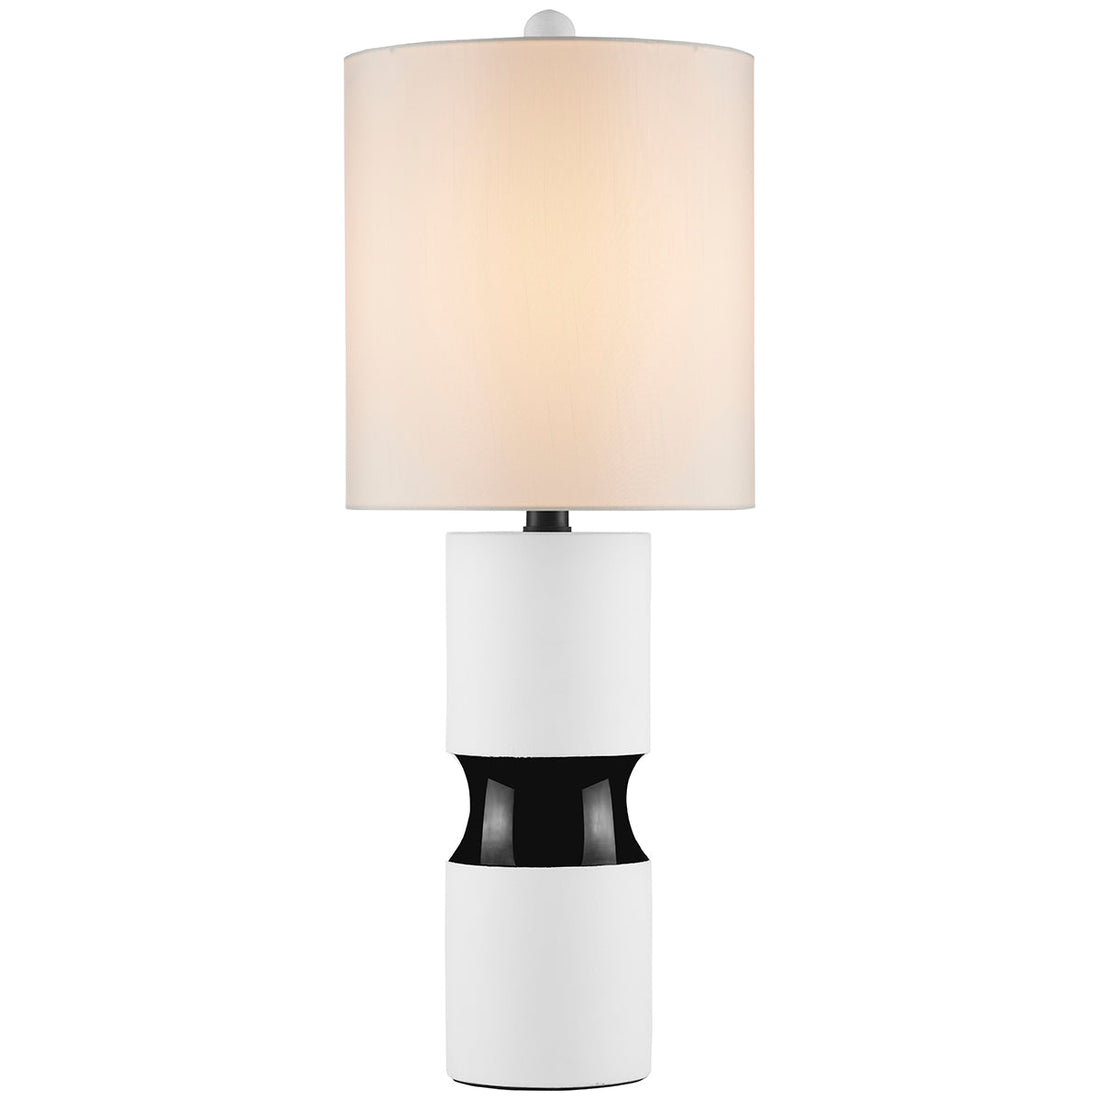 Currey and Company Althea Table Lamp